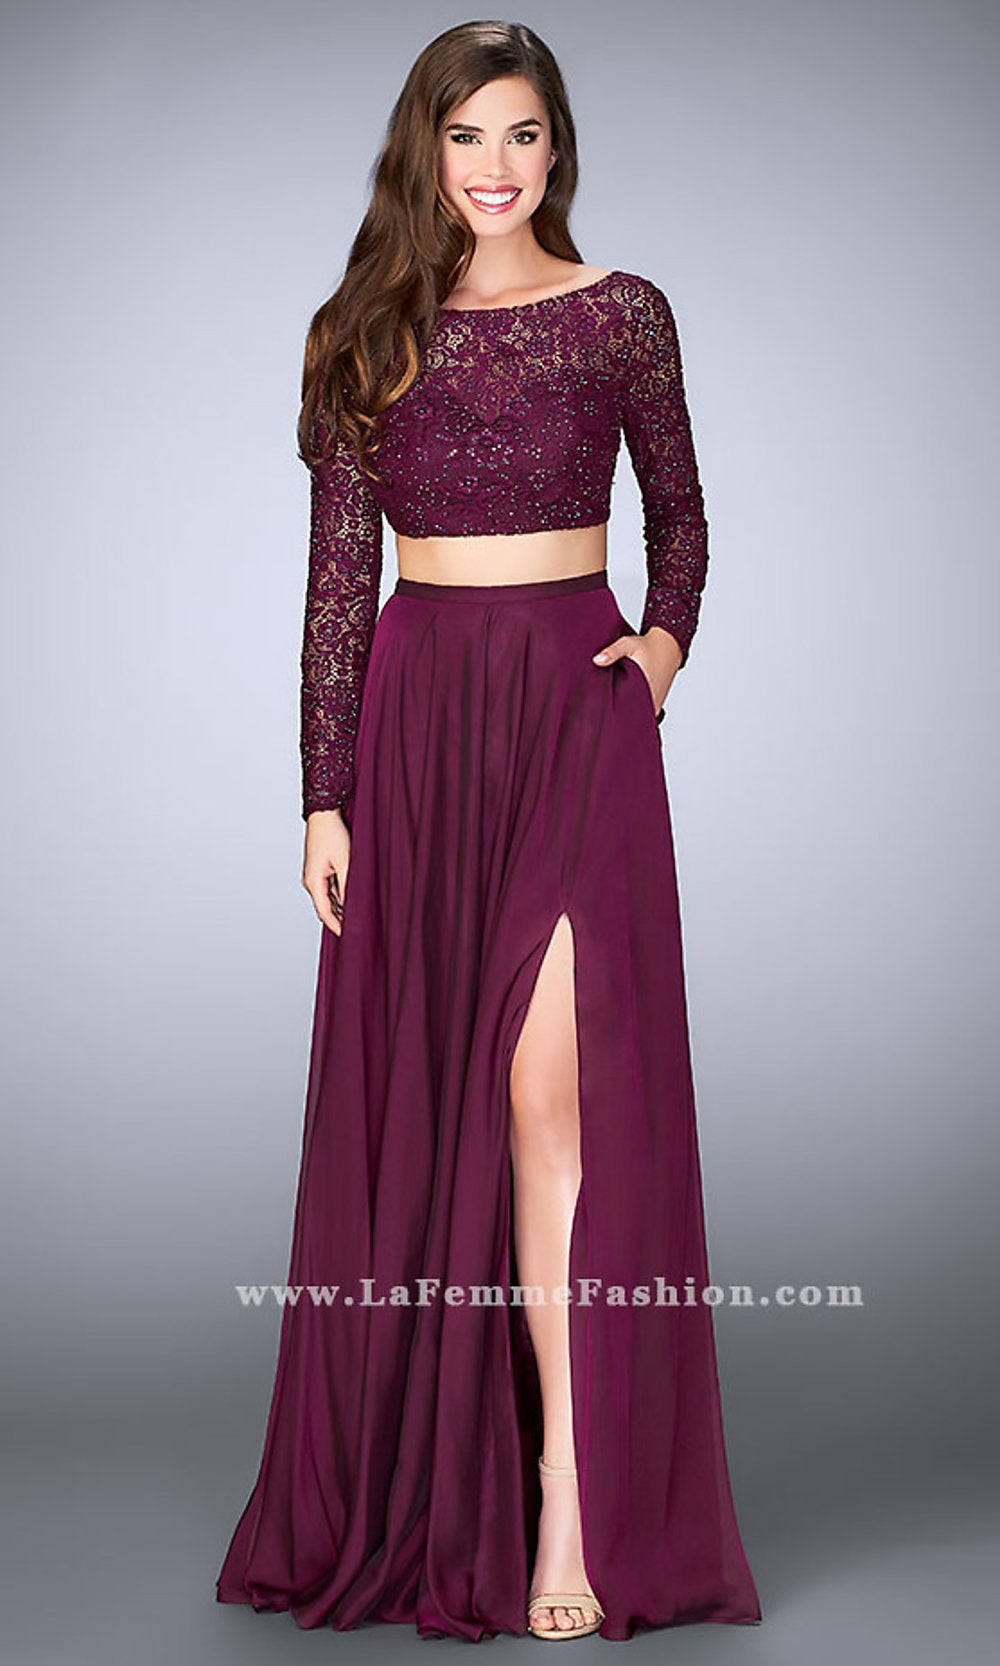 Long PromGirl Two-Piece Formal Prom Dress